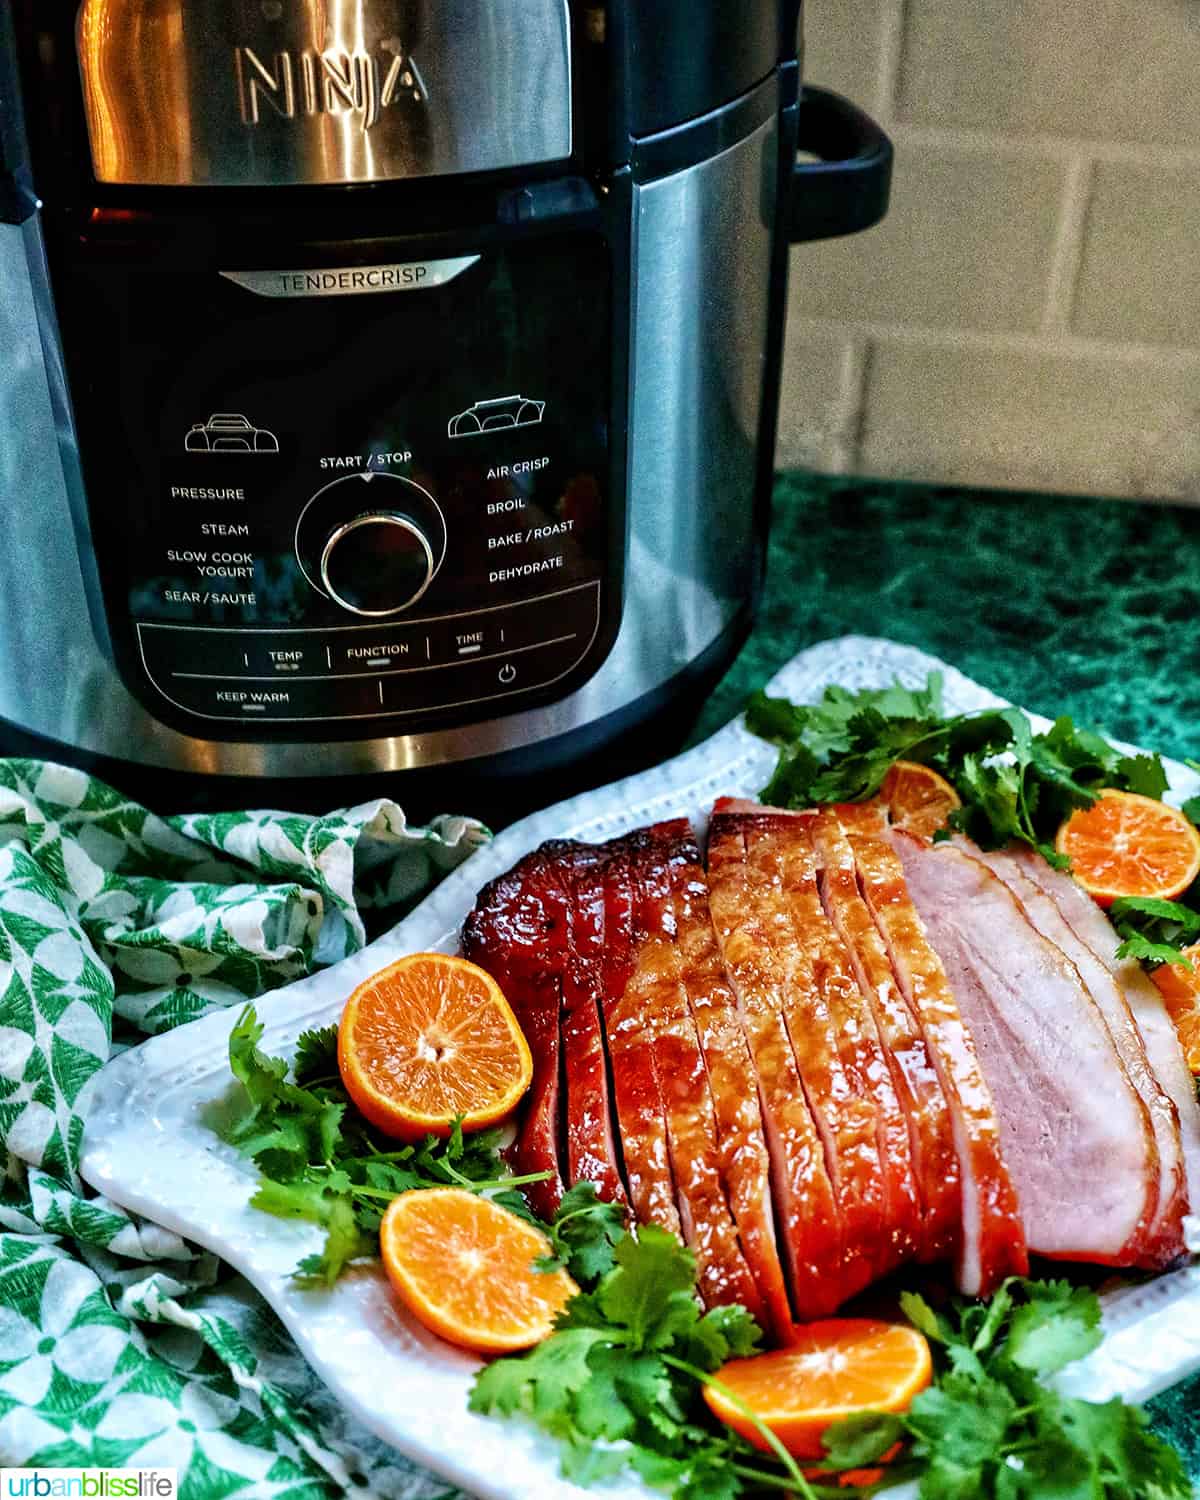 Ninja Foodi air fryer with an air fryer ham plated in front of it.